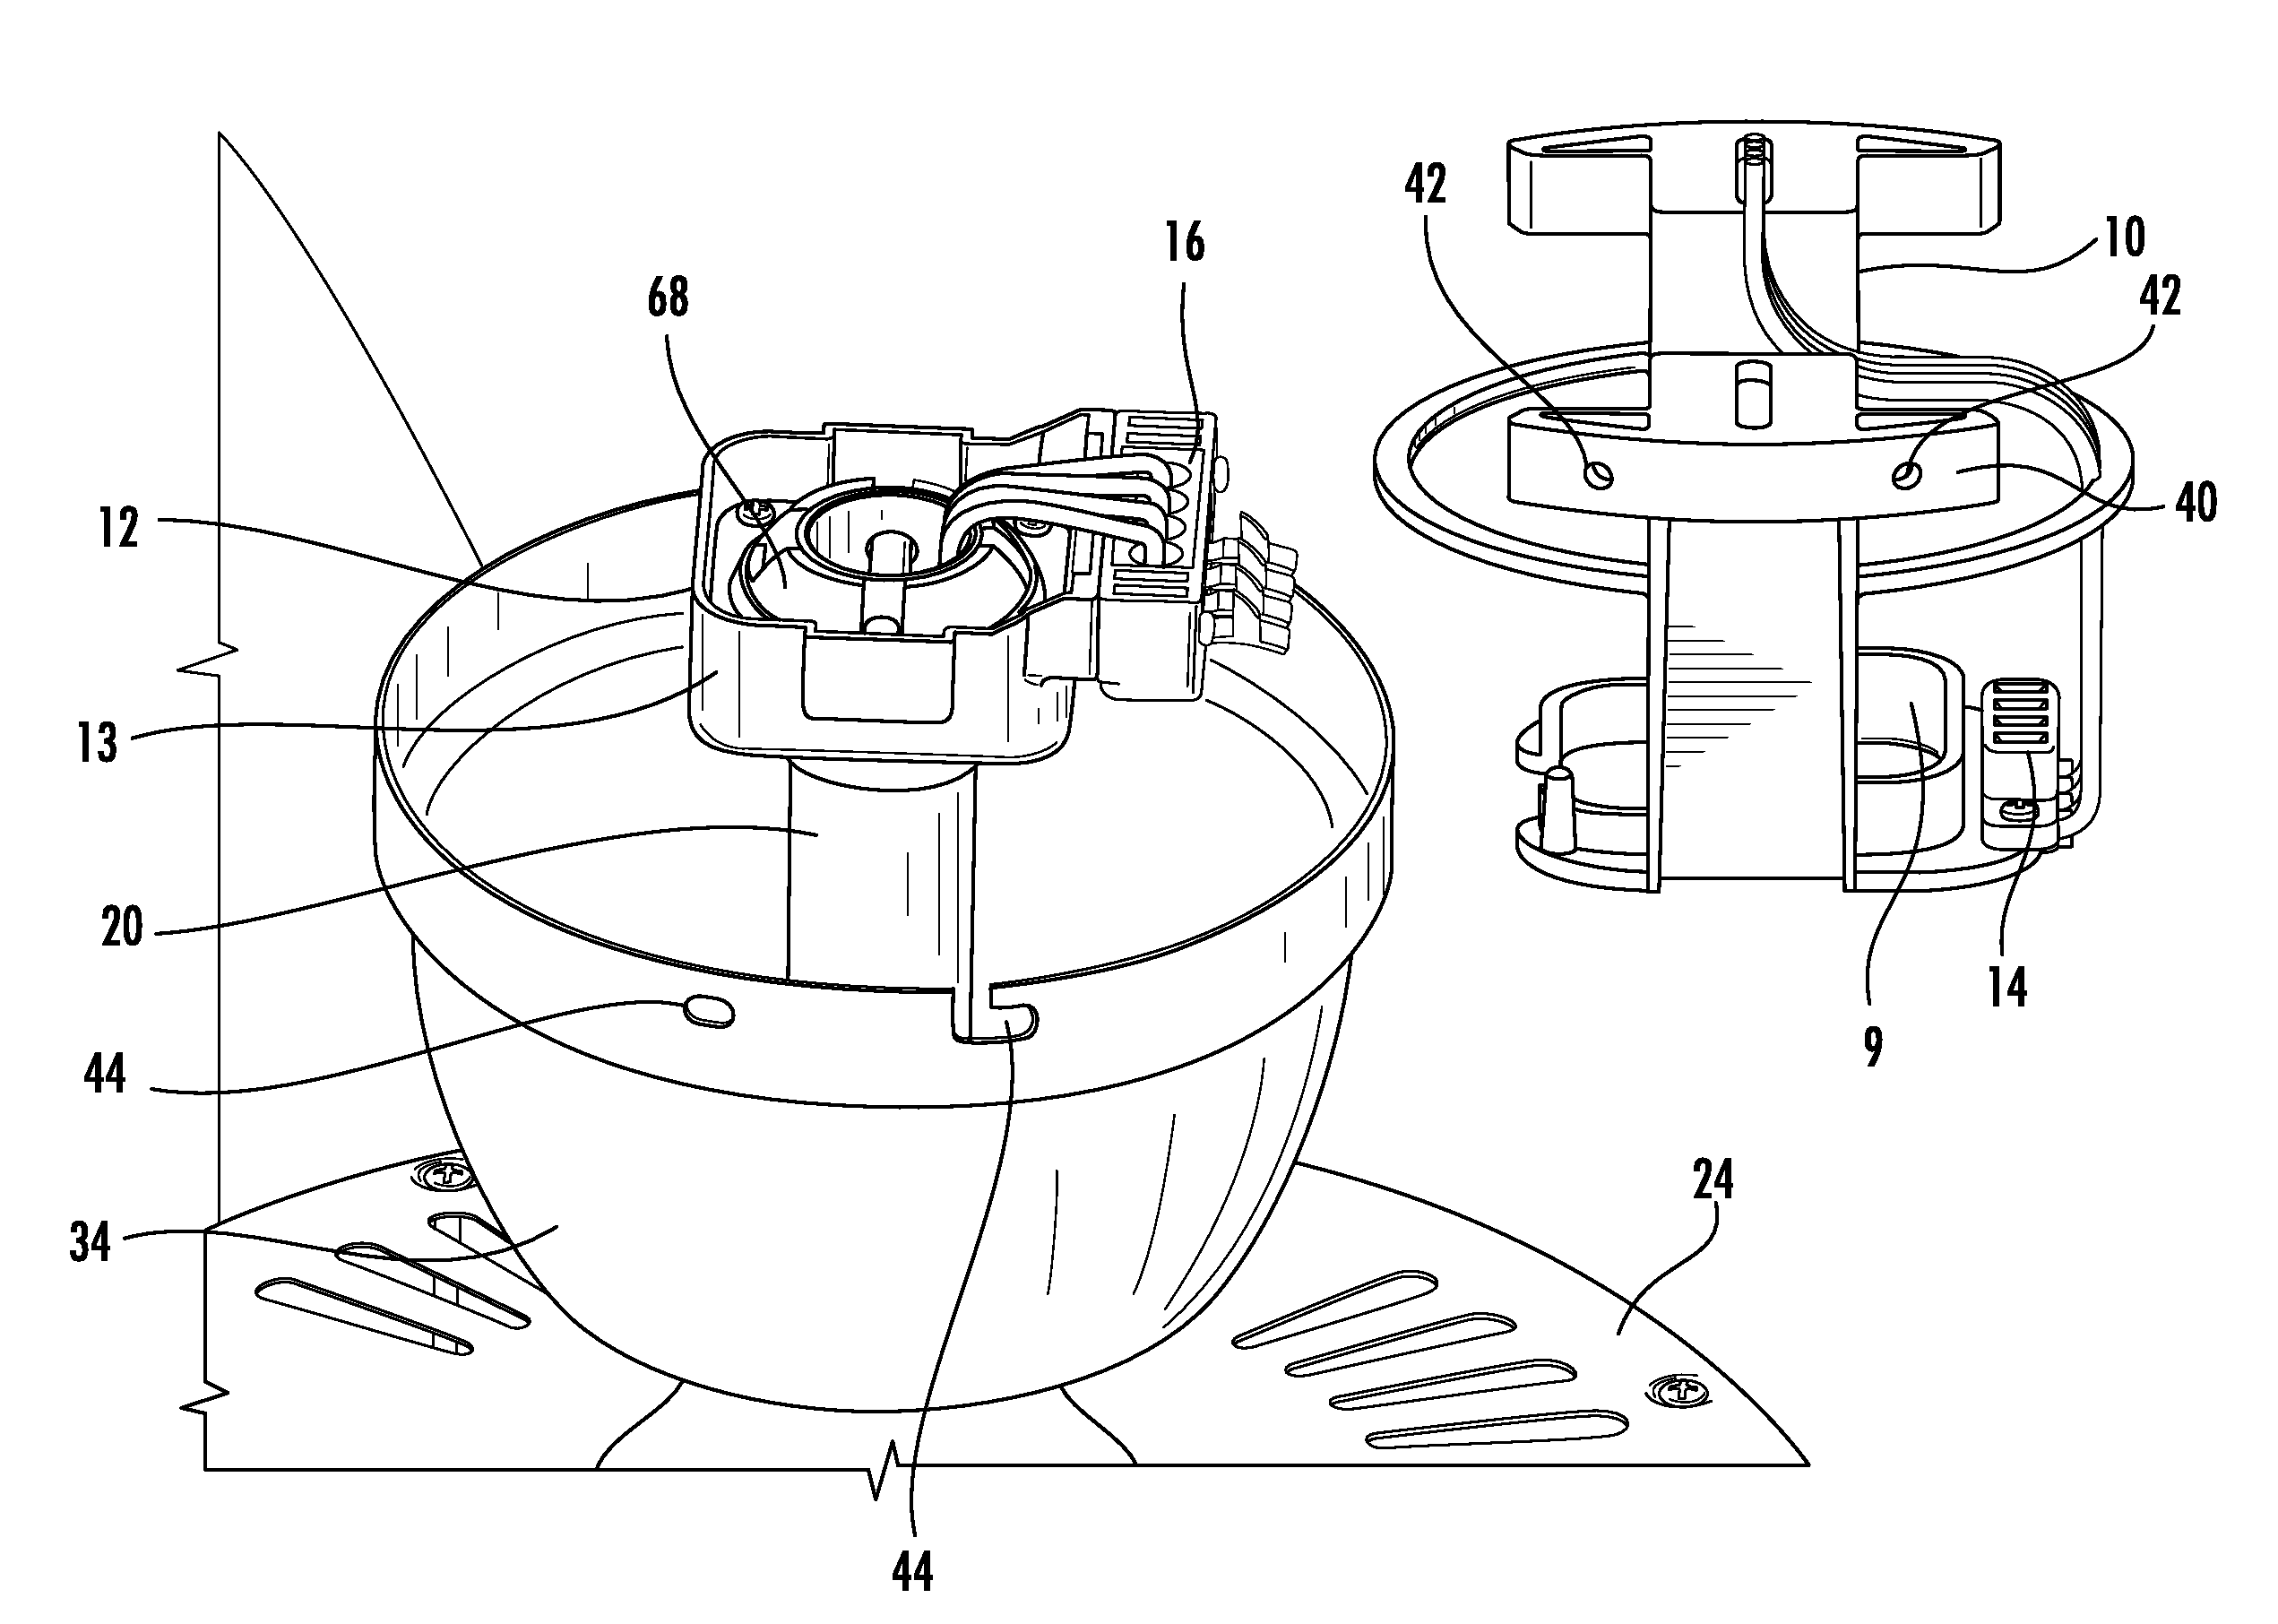 Systems And Methods For Mounting Electrically Powered Devices To Ceilings And Other Structures